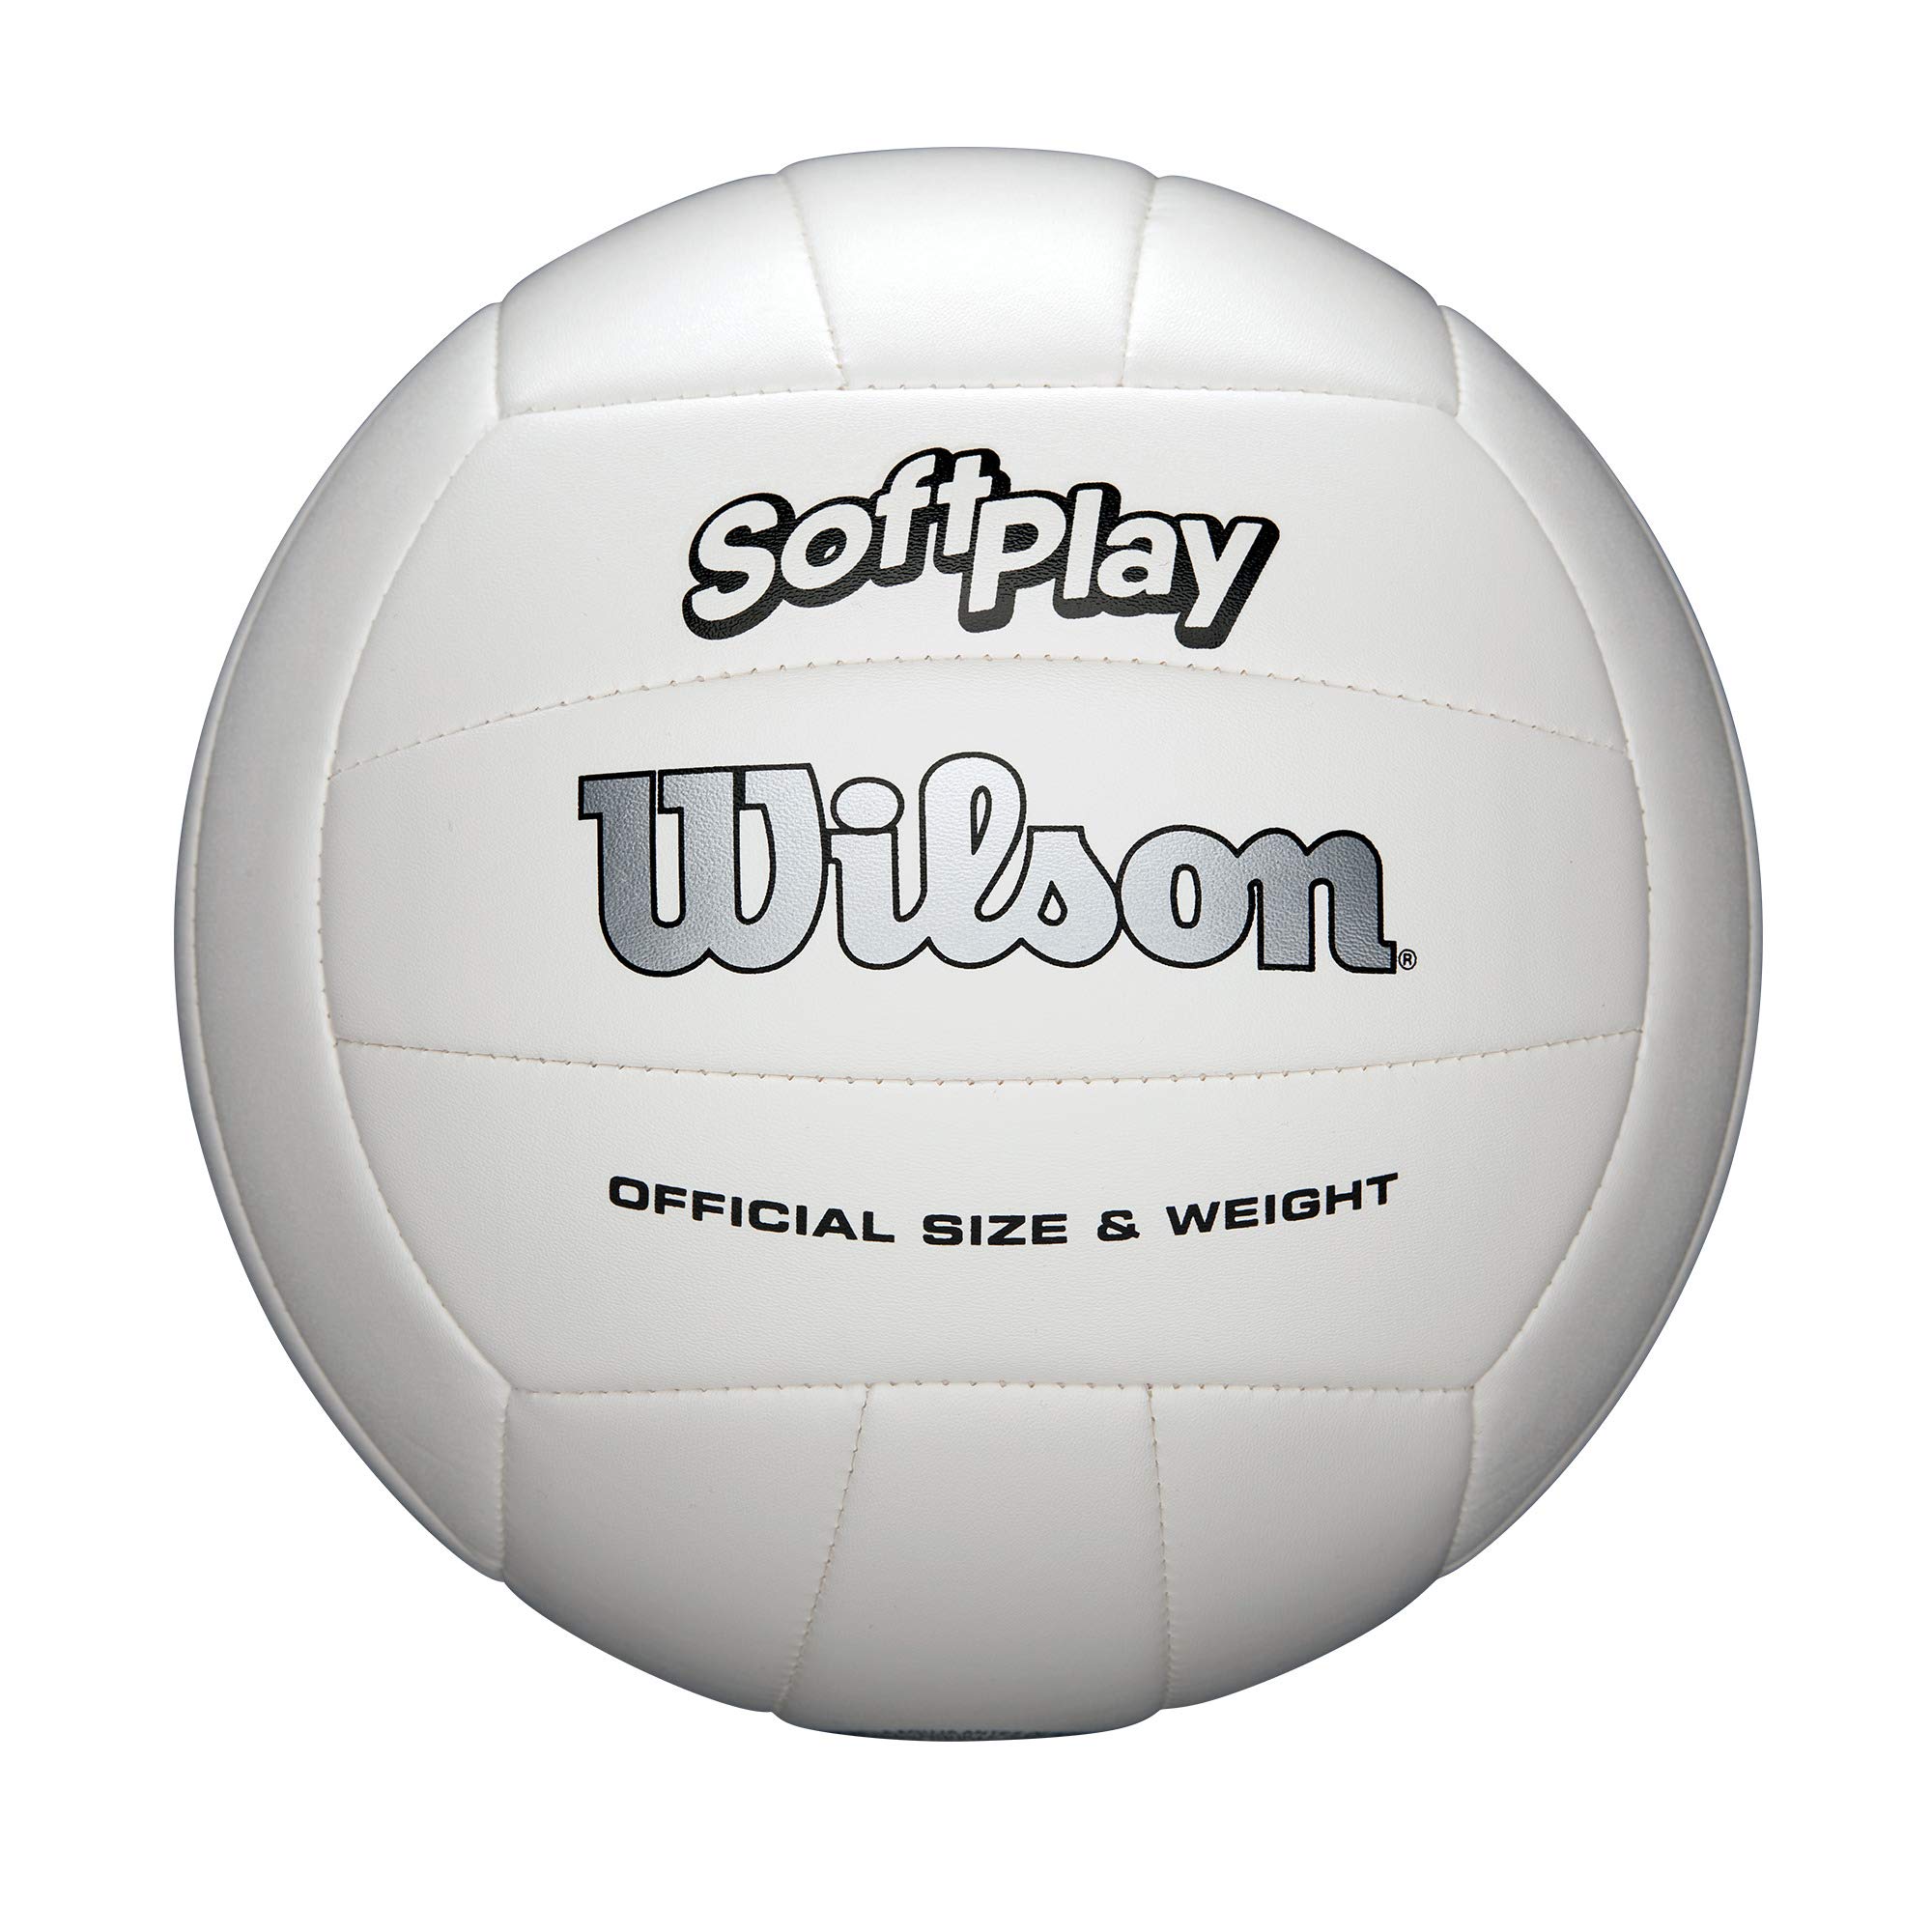 WILSON Softplay Volleyball - Official Size